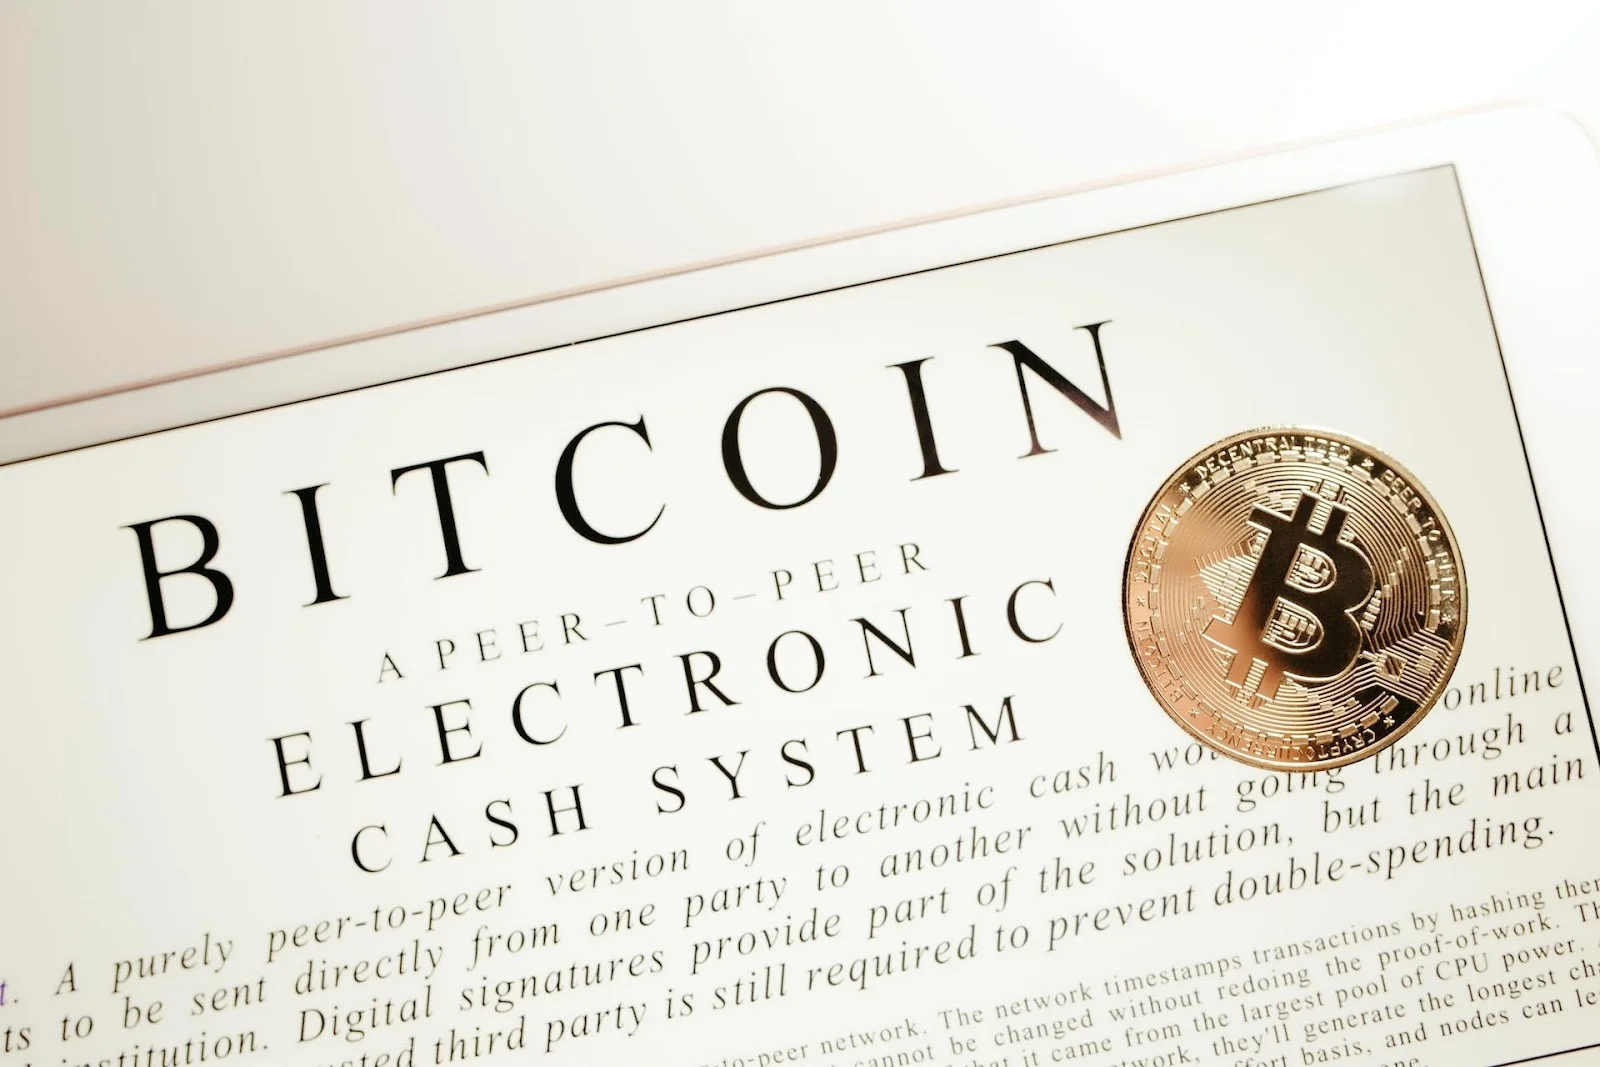 The printed Bitcoin Whitepaper with a physical Bitcoin placed over it